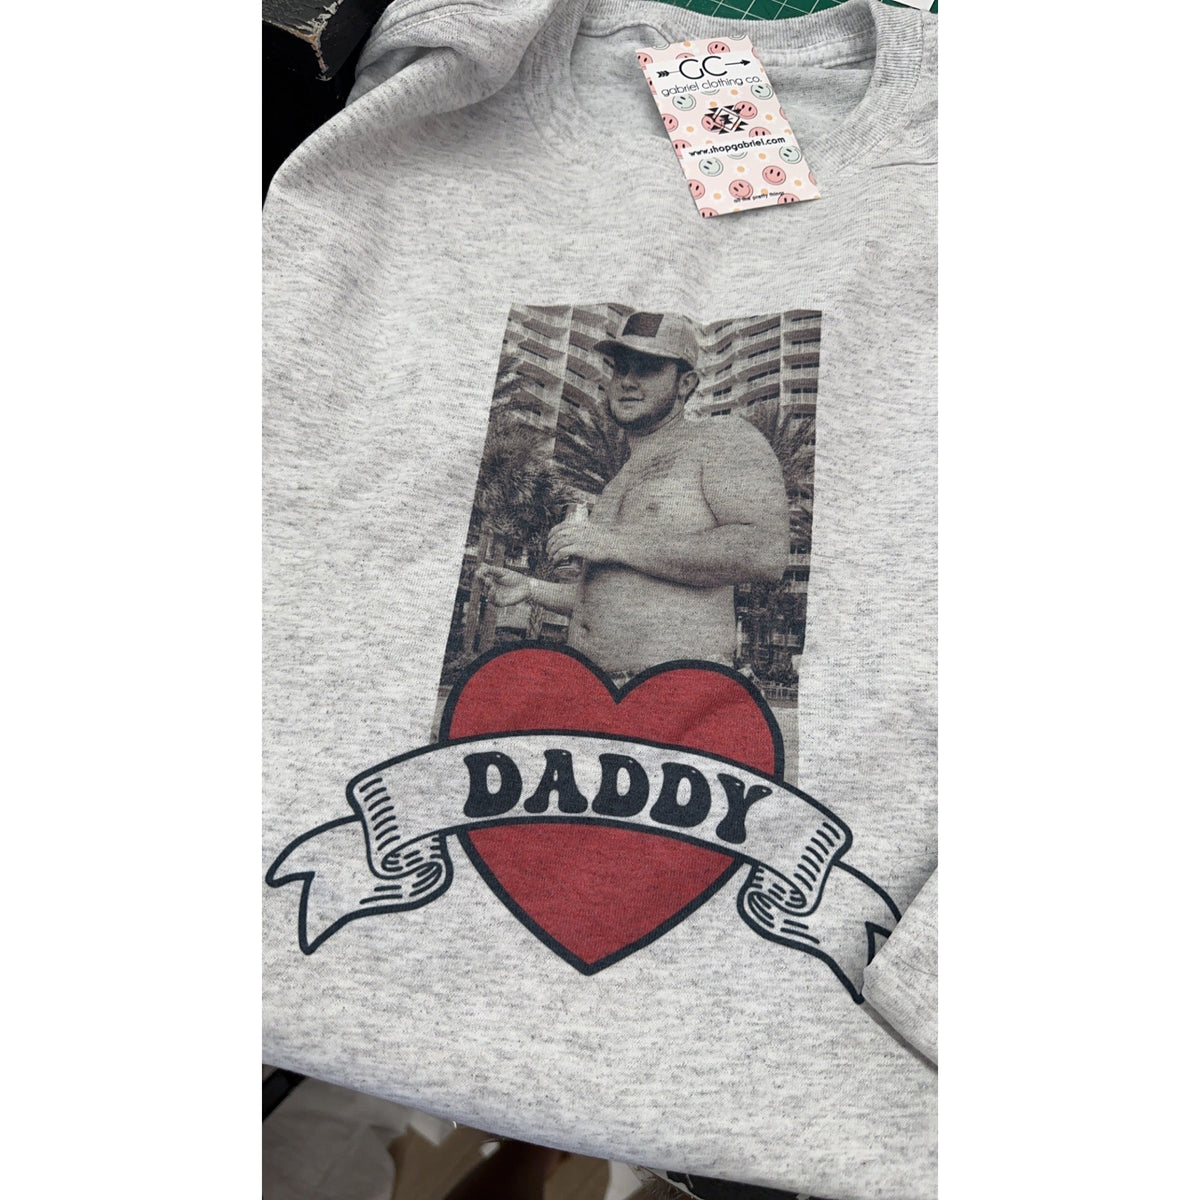 Hubby/Daddy Personalized T-shirt or Sweatshirt